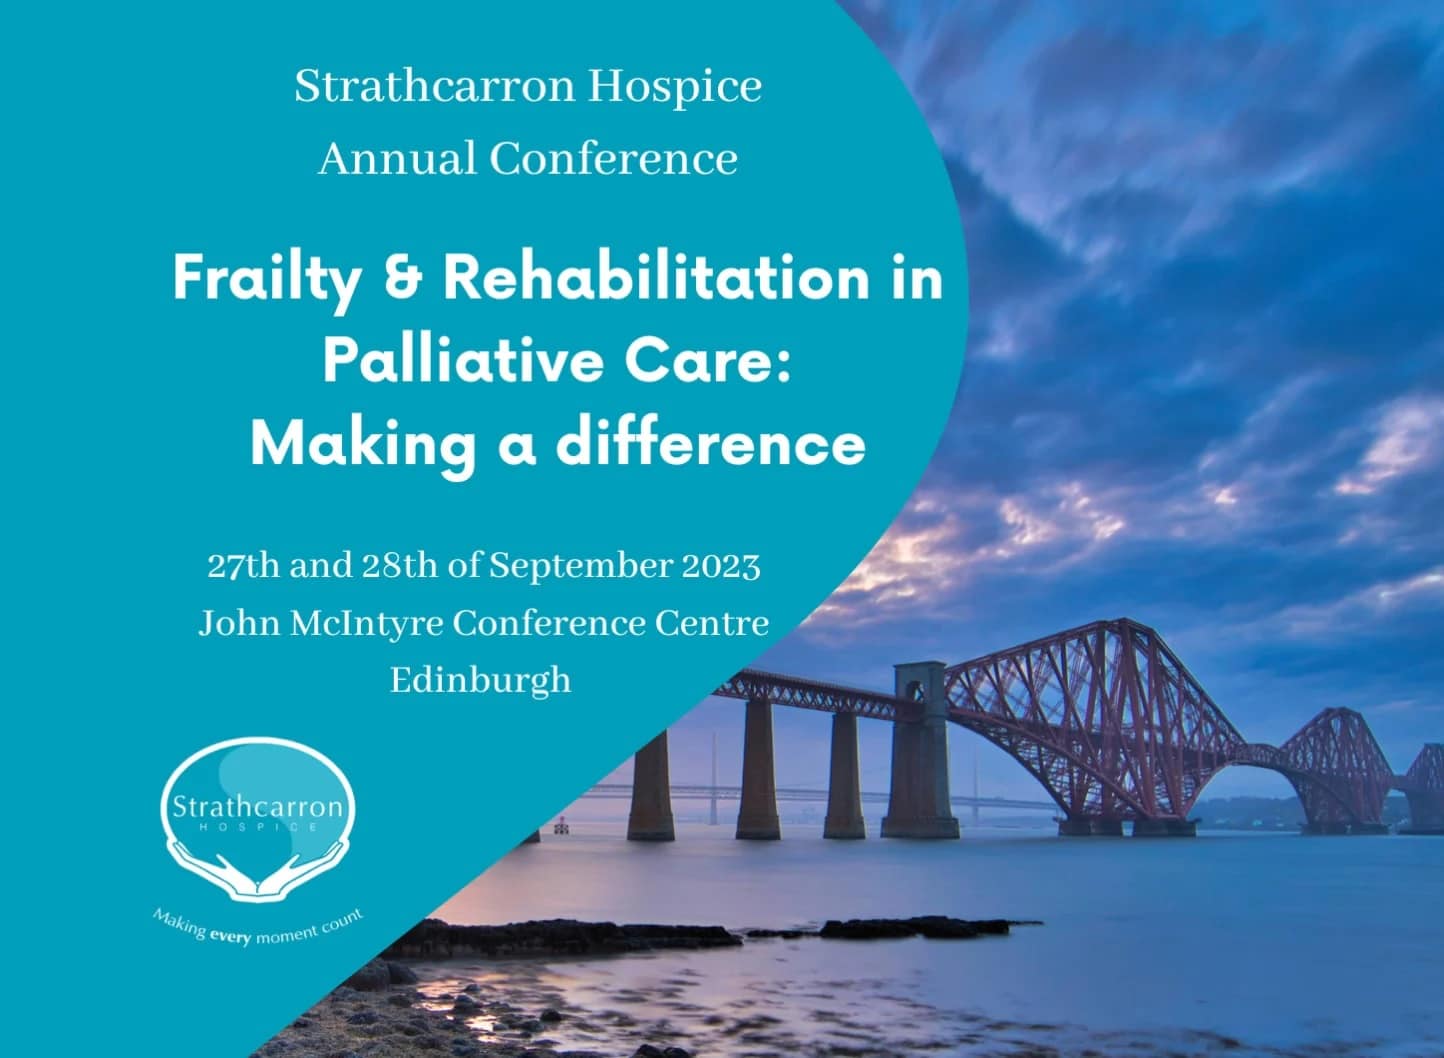 Frailty and Rehabilitation in Palliative Care Conference